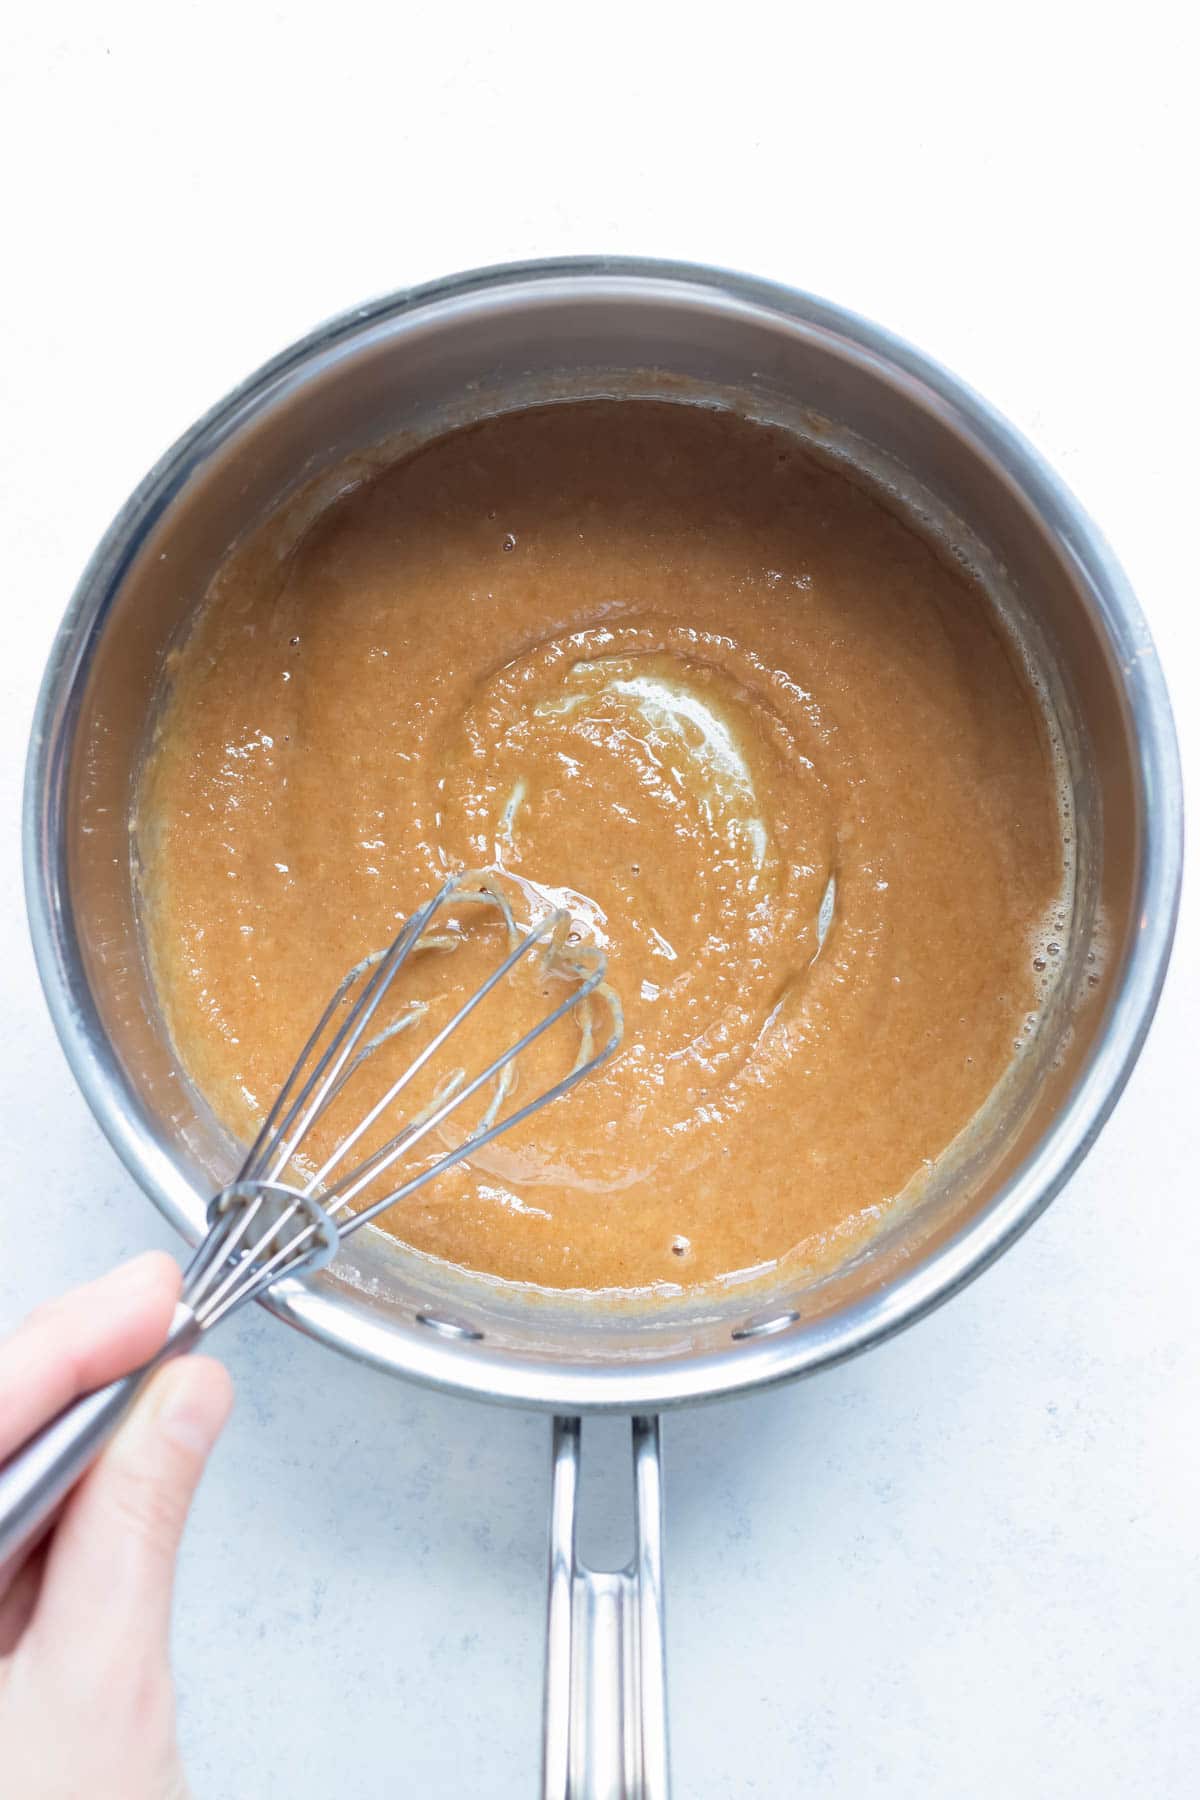 A light brown roux is made on the stove.